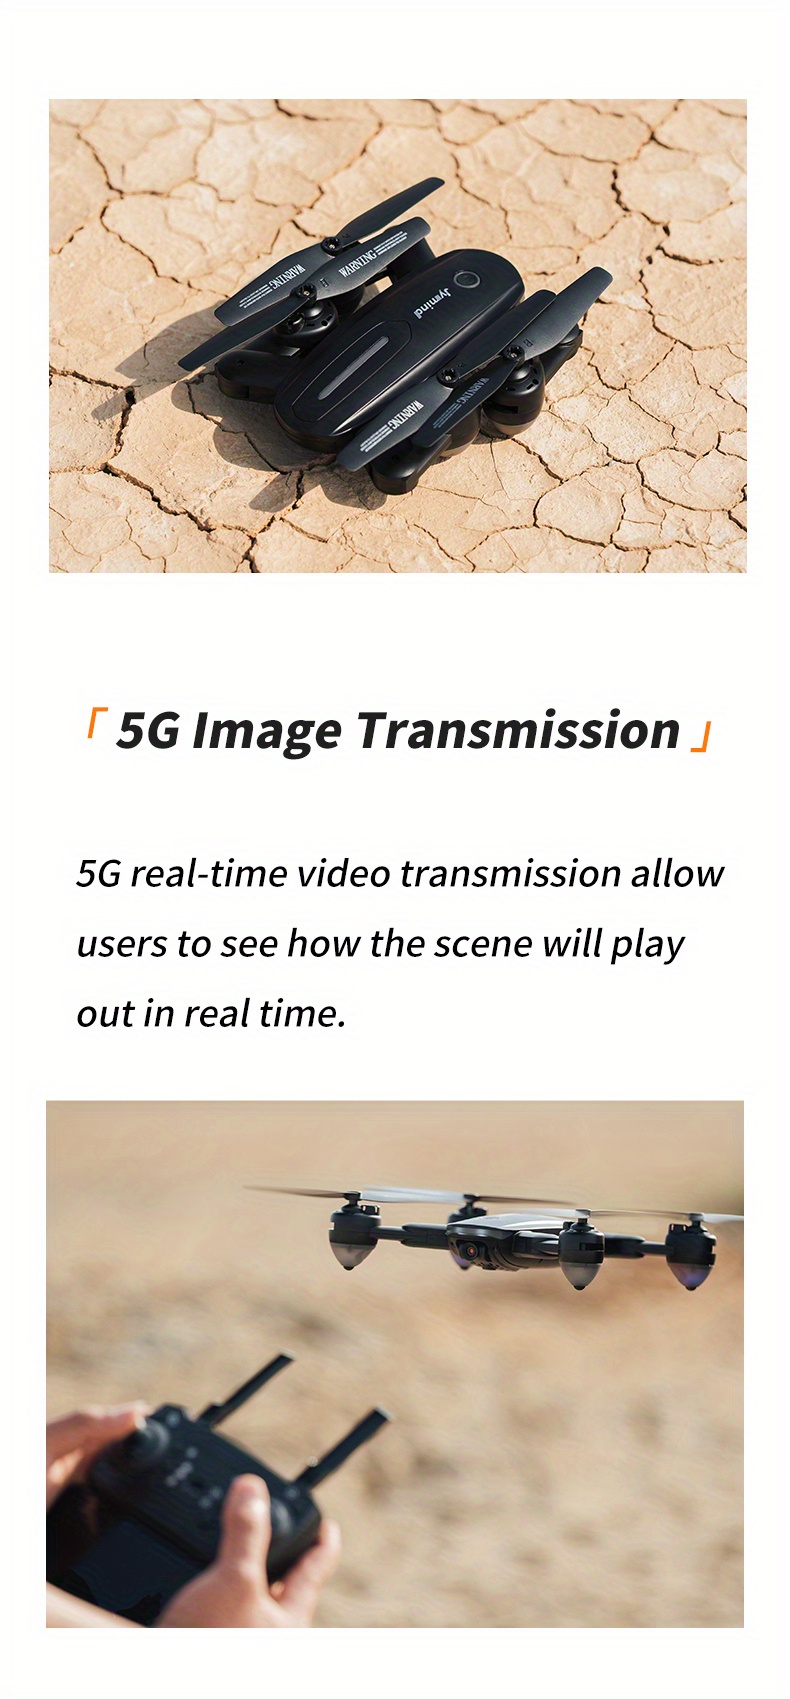 drone with hd dual camera optical flow hovering headless mode one key take off landing trajectory flight 5g image transmission gesture photography folding design remote control carrying bag details 9